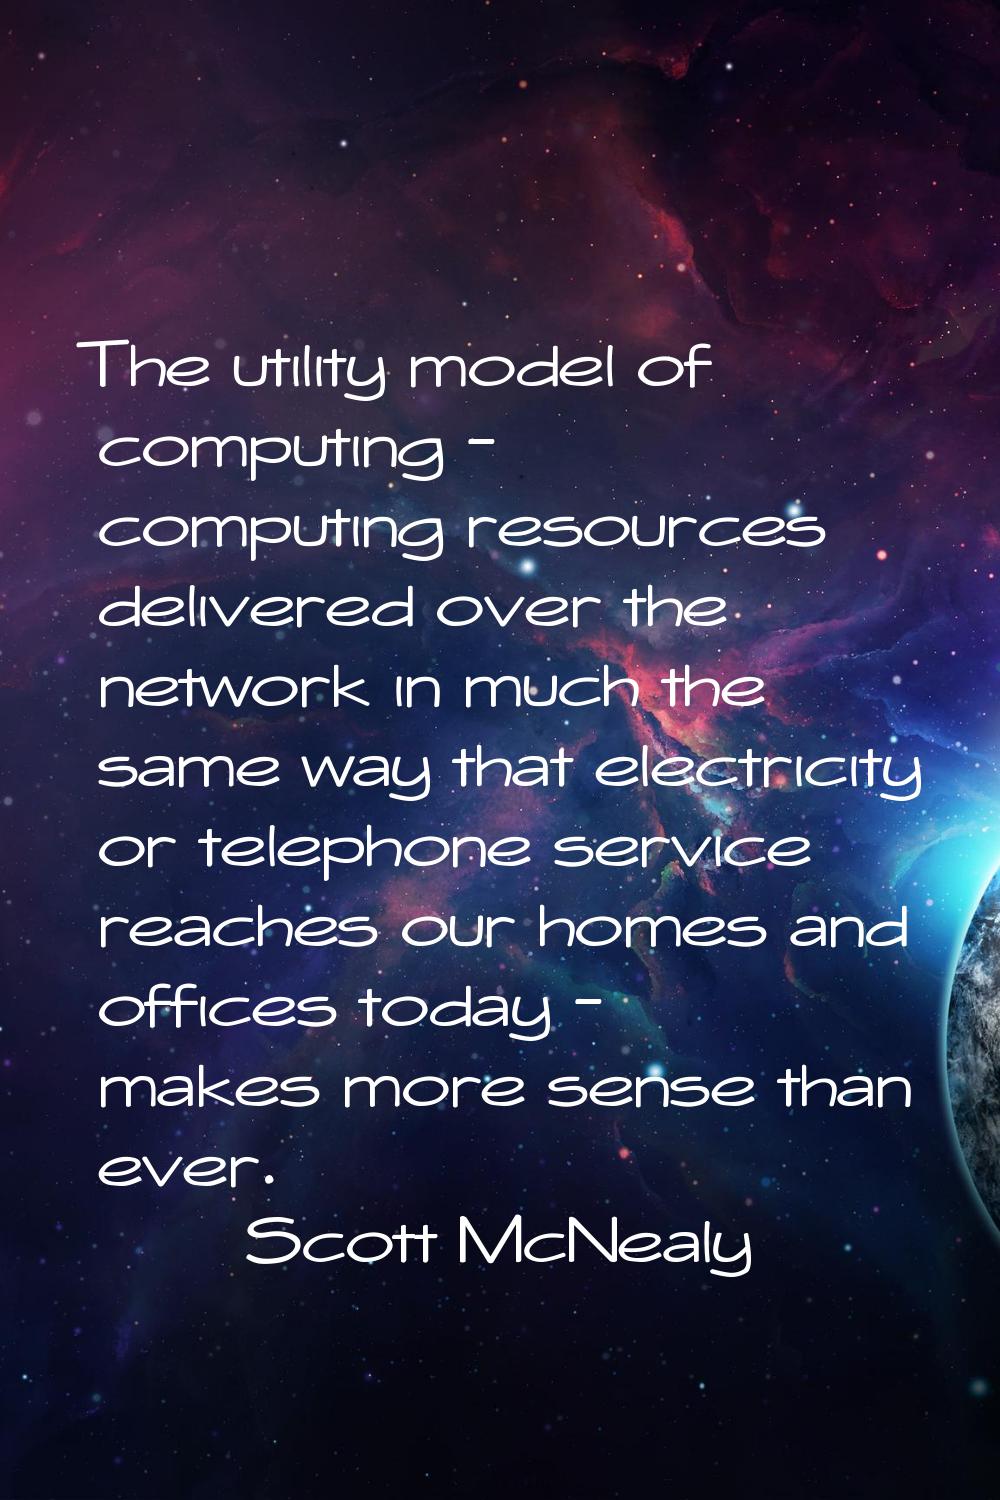 The utility model of computing - computing resources delivered over the network in much the same wa